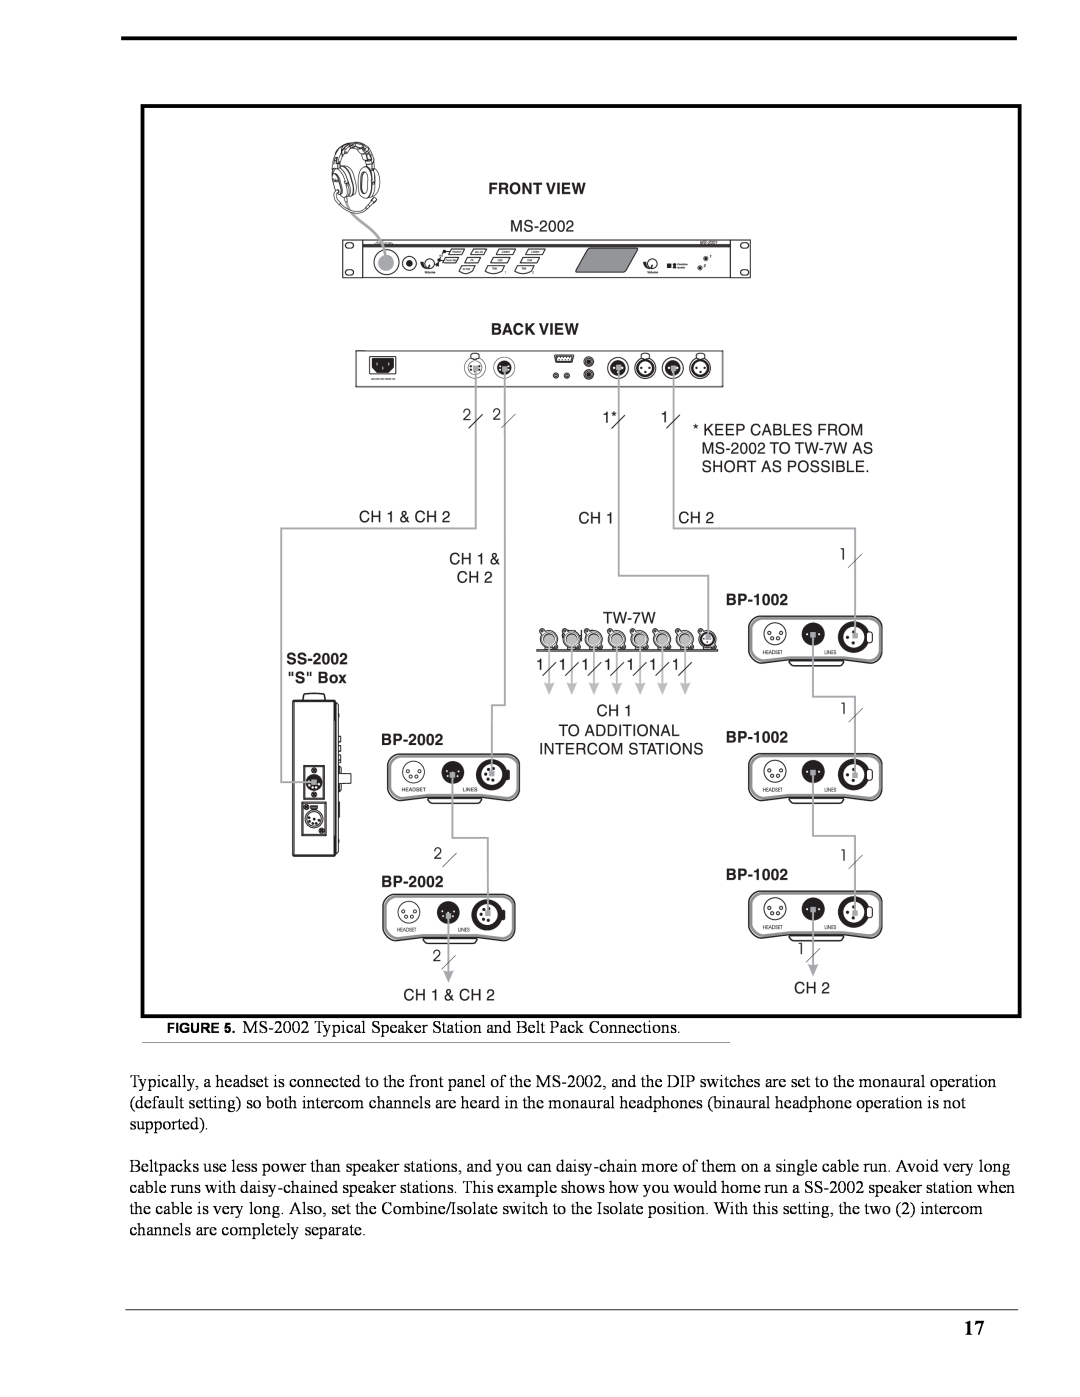 Telex user manual MS-2002 Typical Speaker Station and Belt Pack Connections 